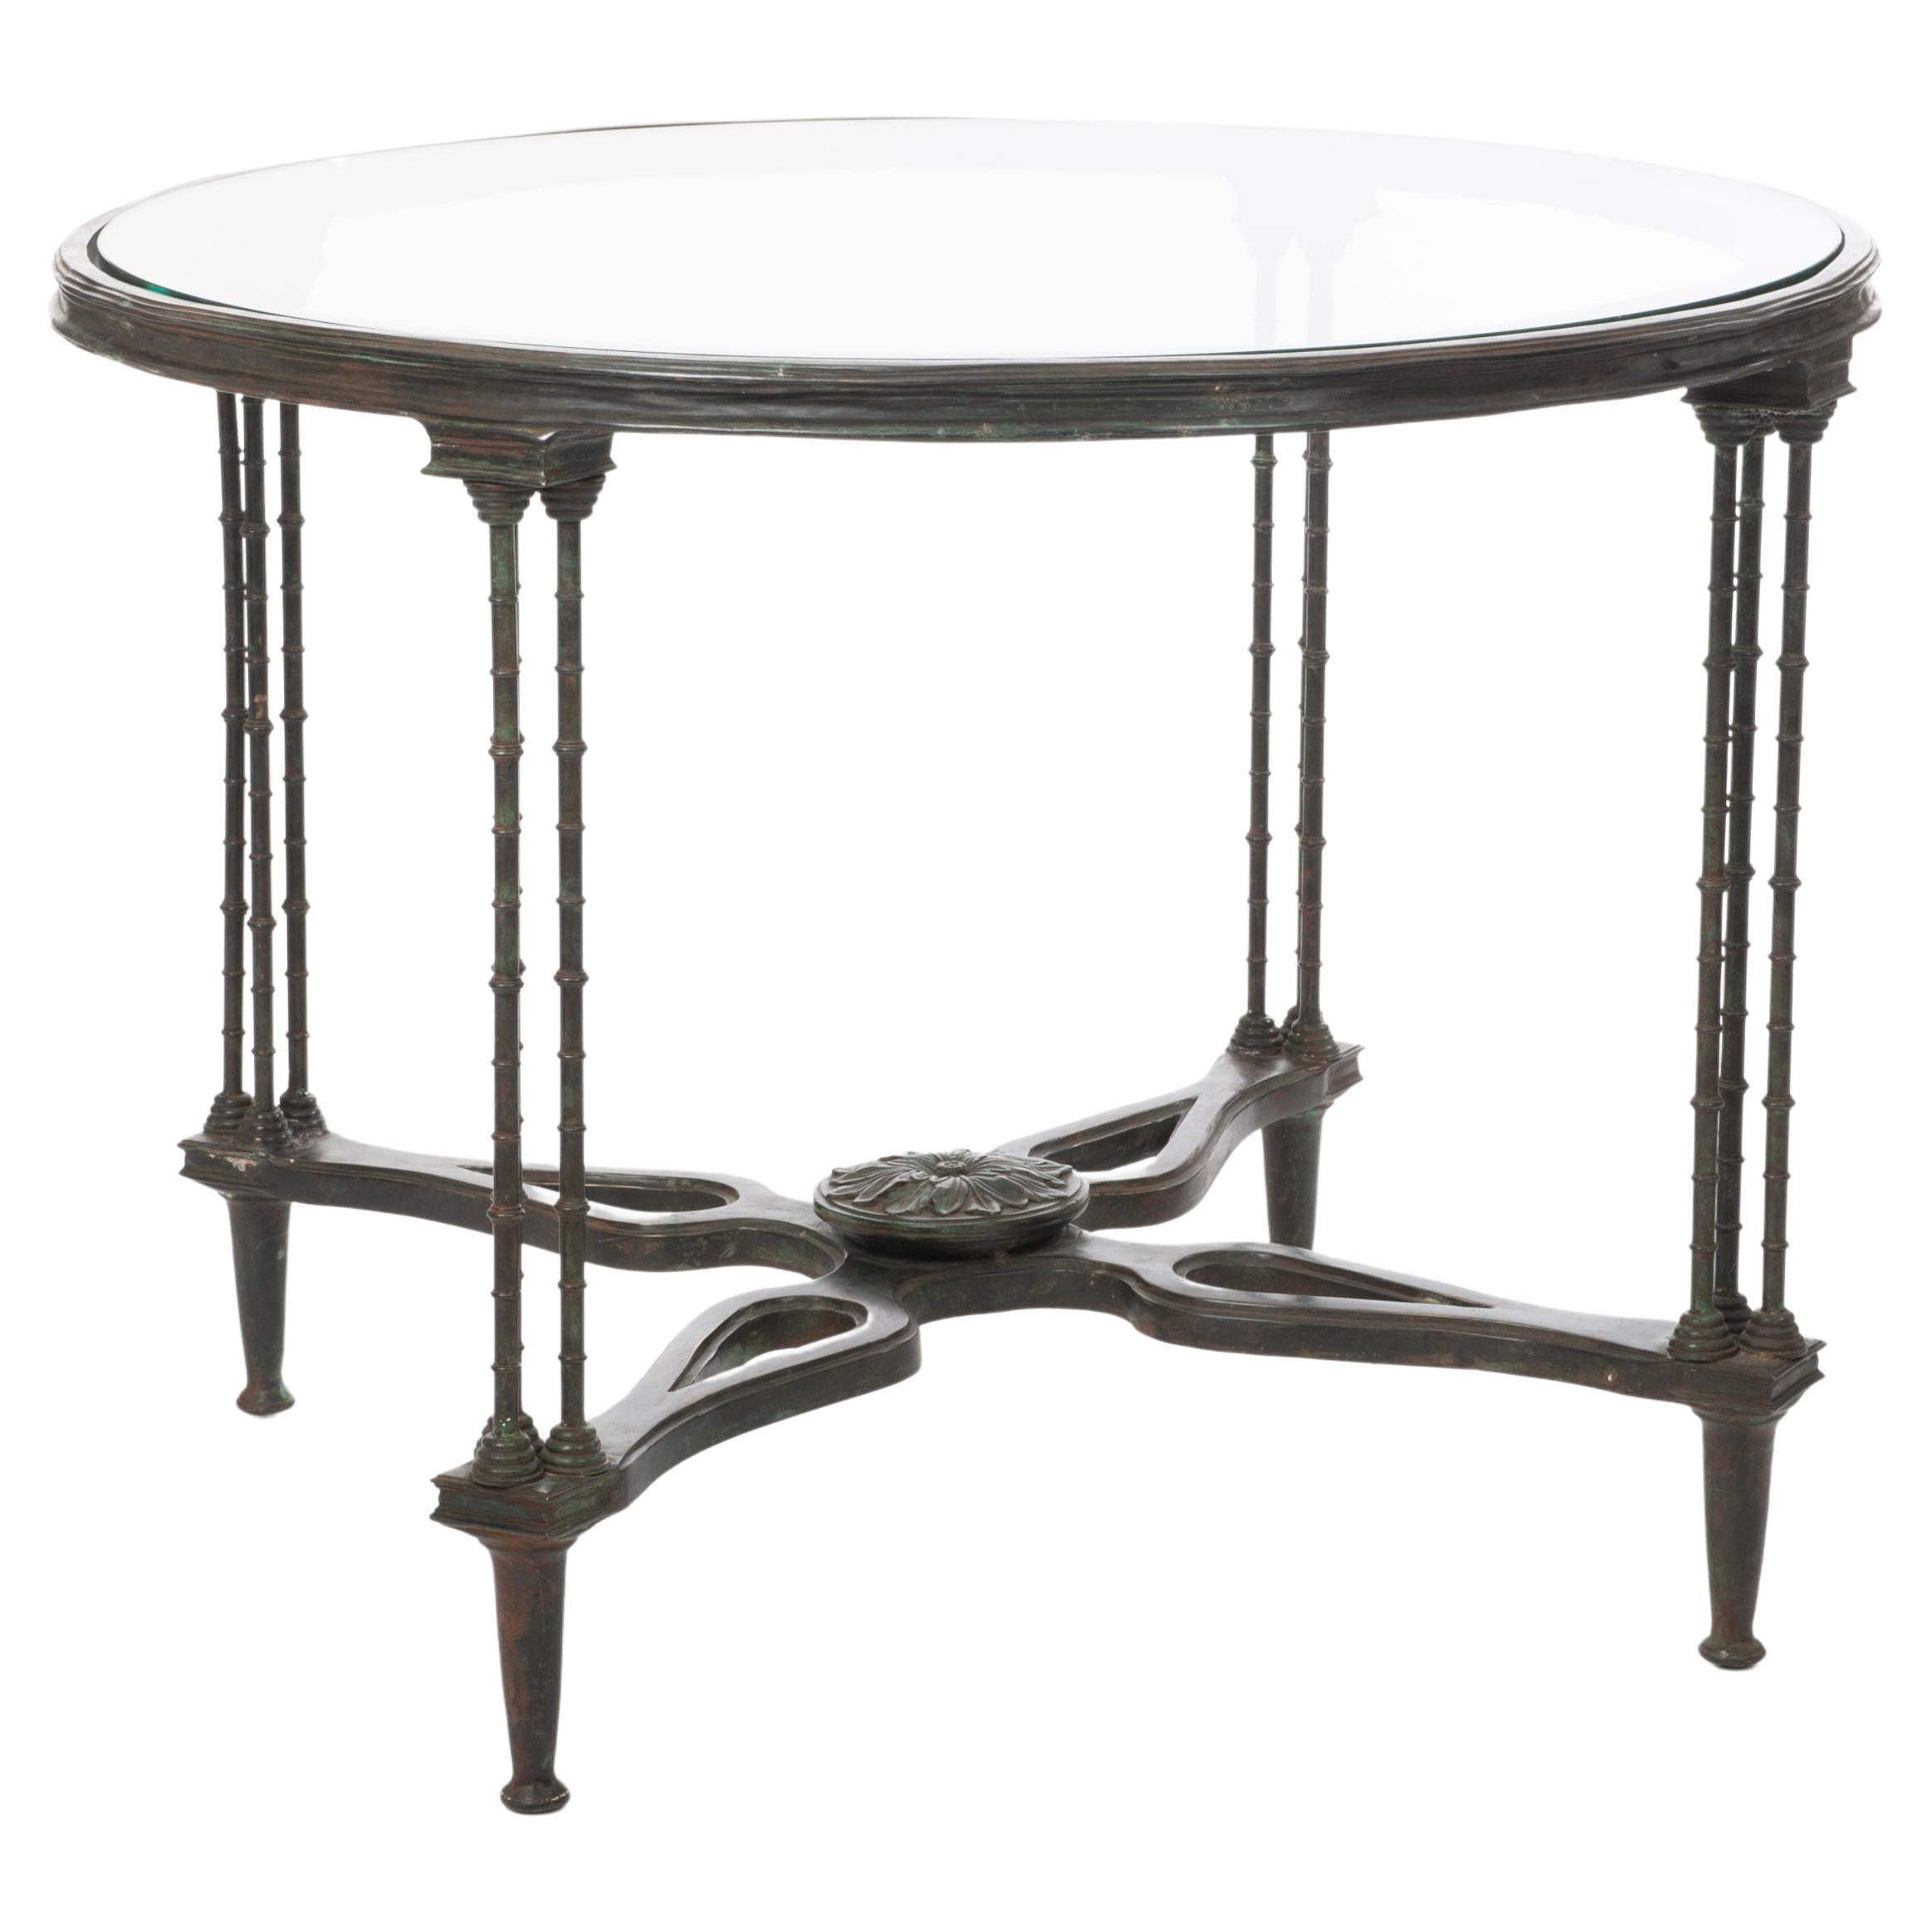 French Grazile Green-Greyish Cast Bronze Art Nouveau Table with Glass Top